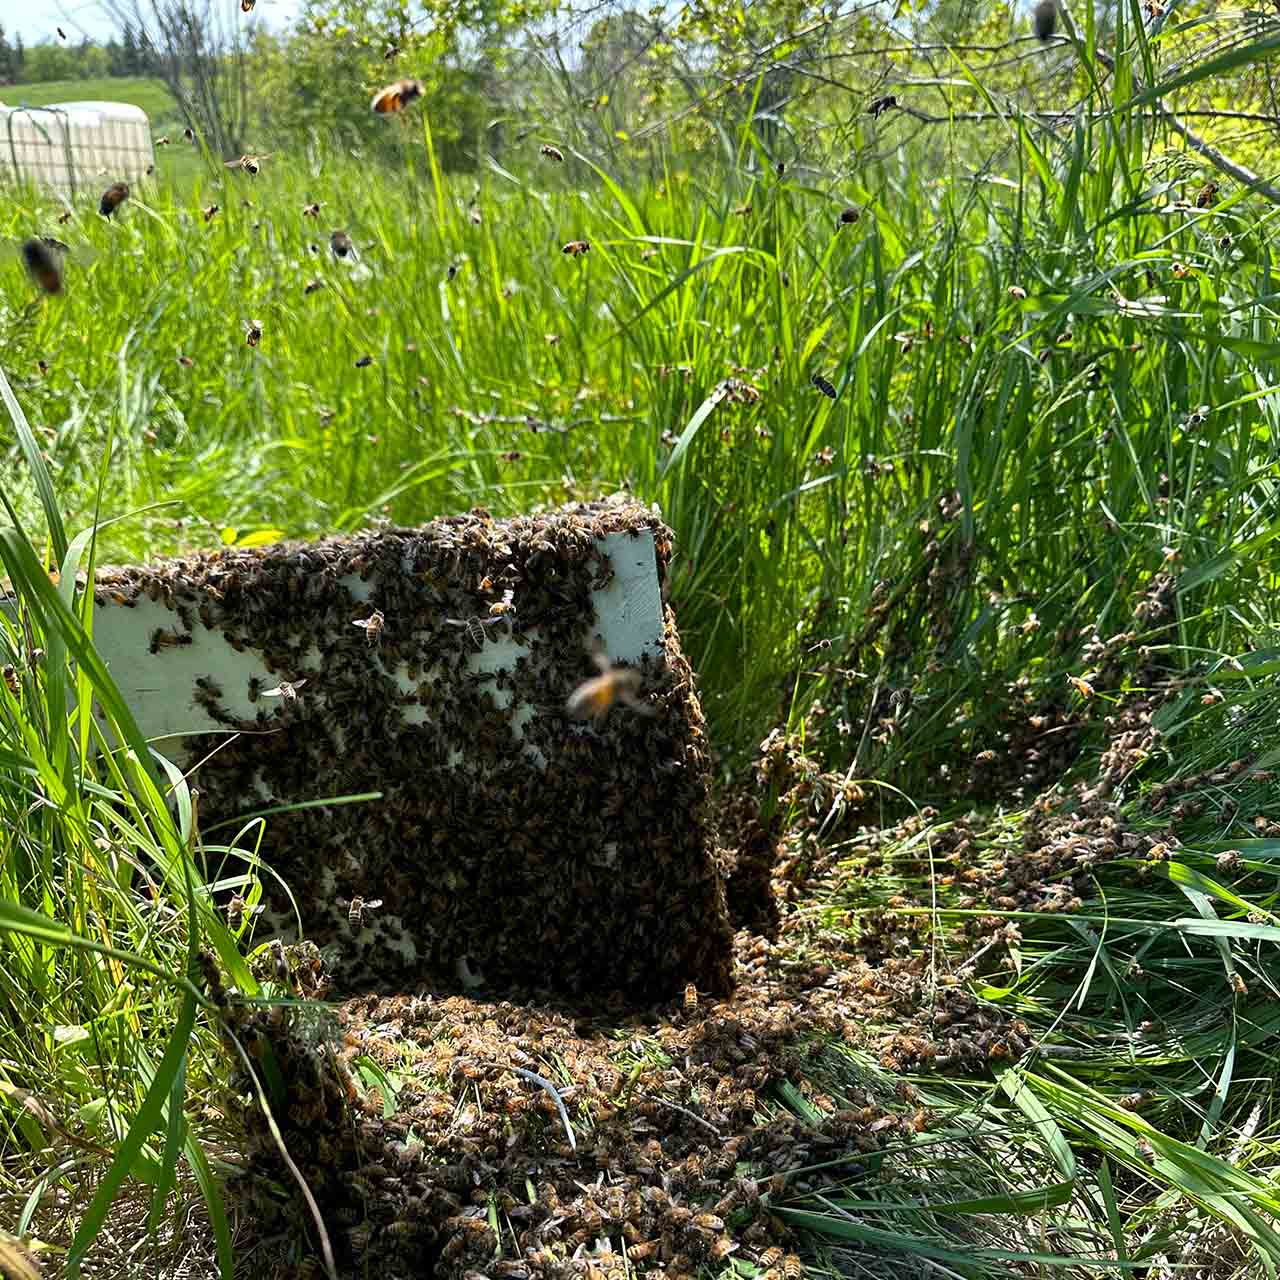 Swarm of bees at Kinghaven Farms